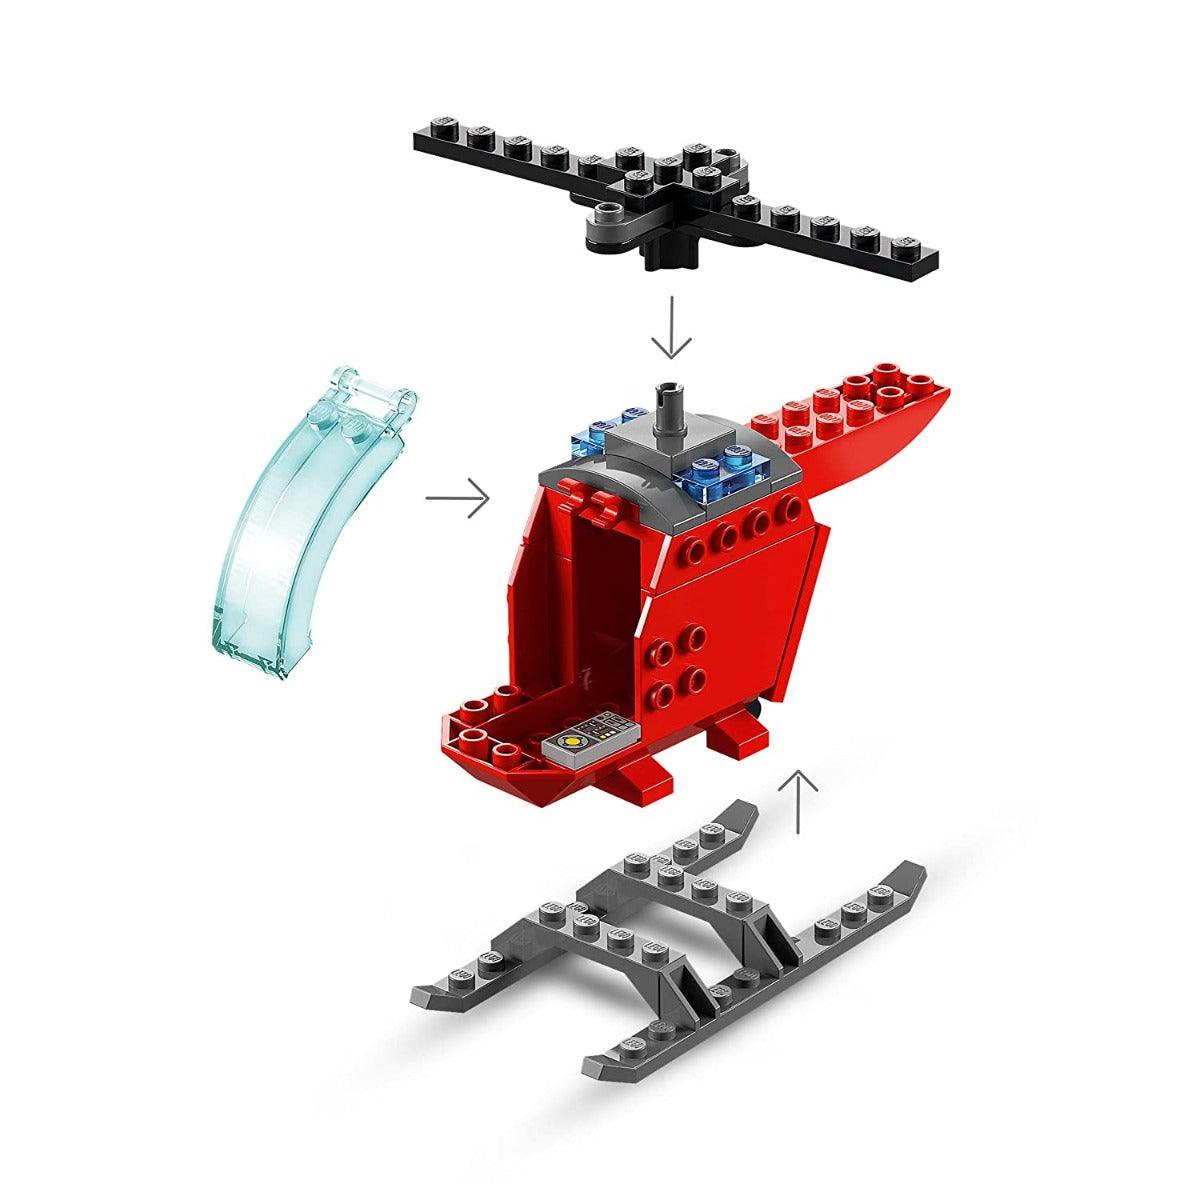 LEGO City Fire Helicopter Building Kit for Ages 4+